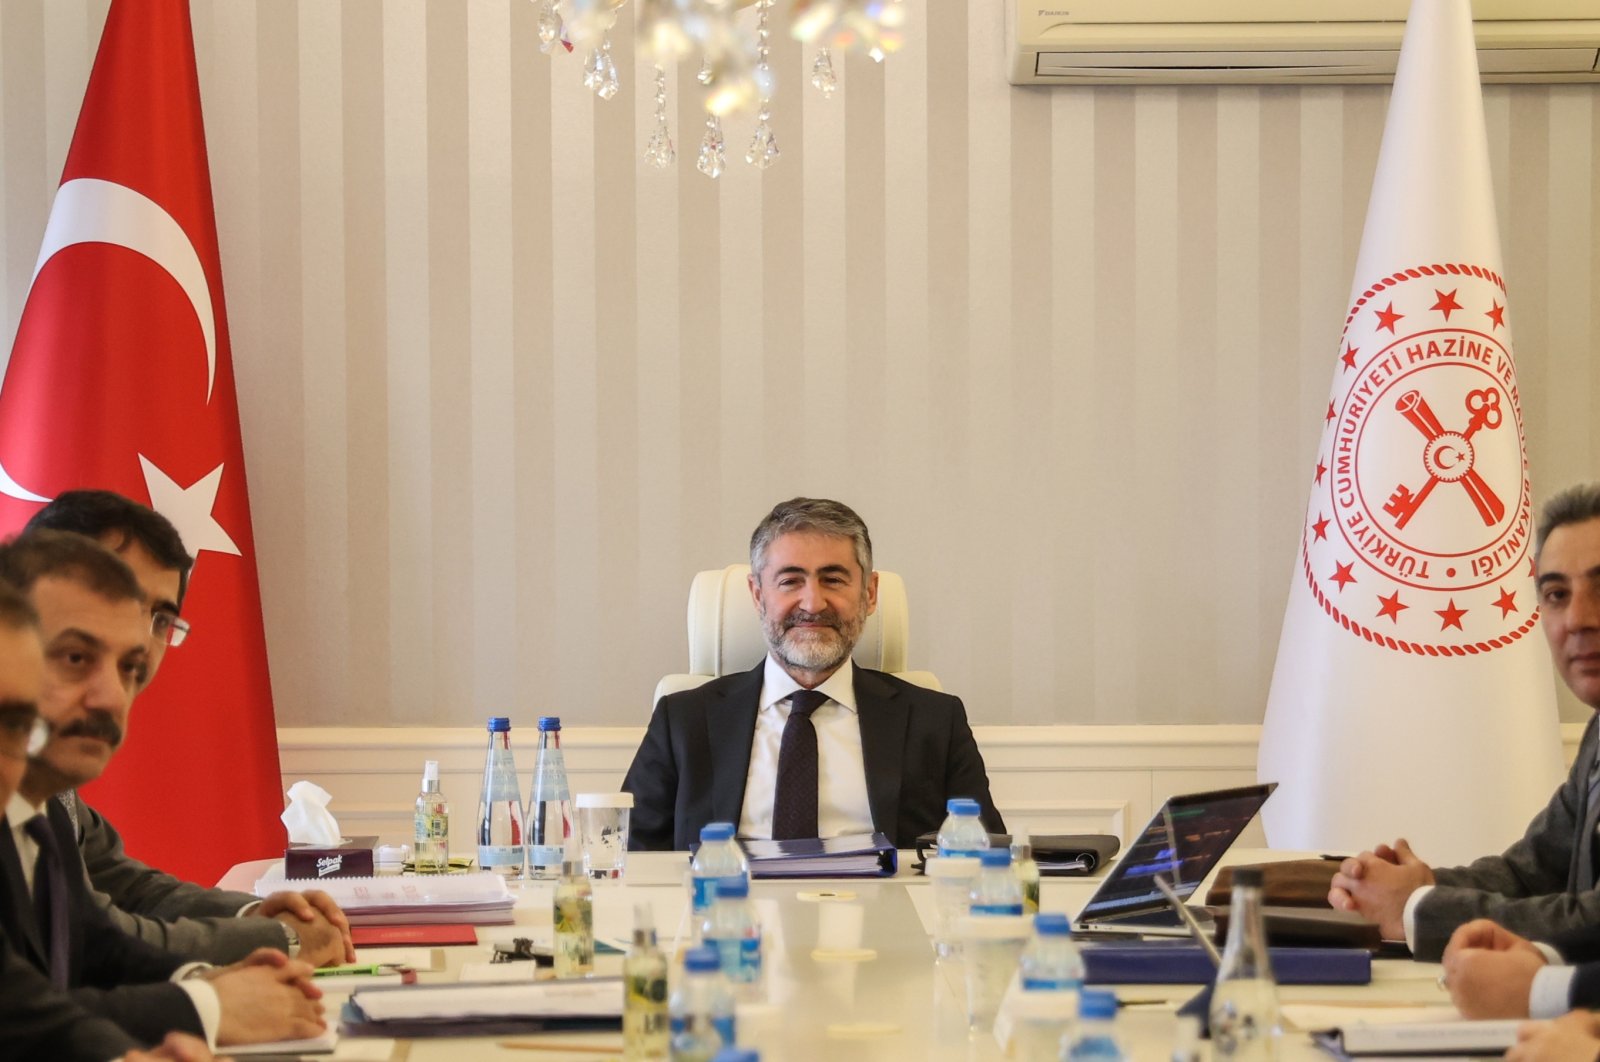 Treasury and Finance Minister Nureddin Nebati during the 3rd meeting of Financial Stability Comittee, Istanbul, Turkey, March 11, 2022. (AA Photo)